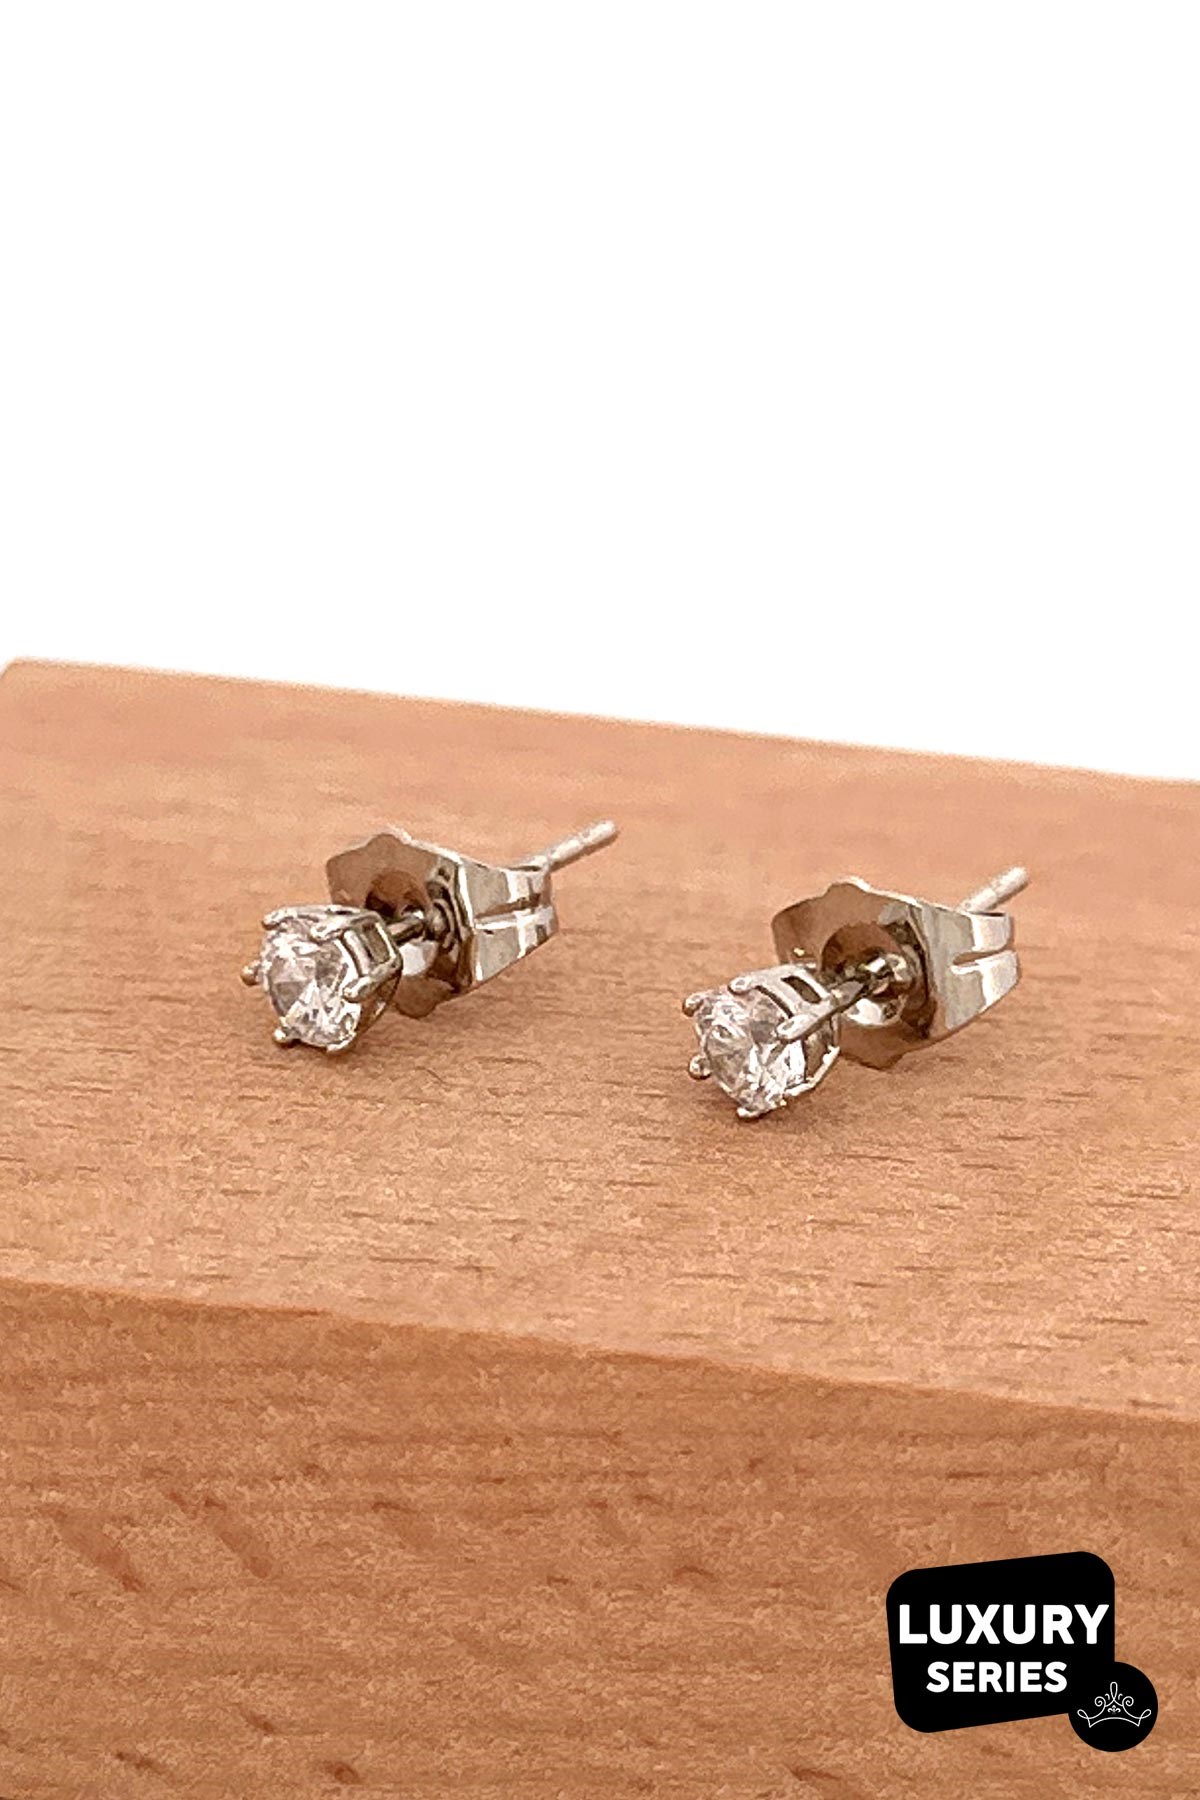 Luxury Small Size Silver Crystal Solitaire Earrings AKE5232